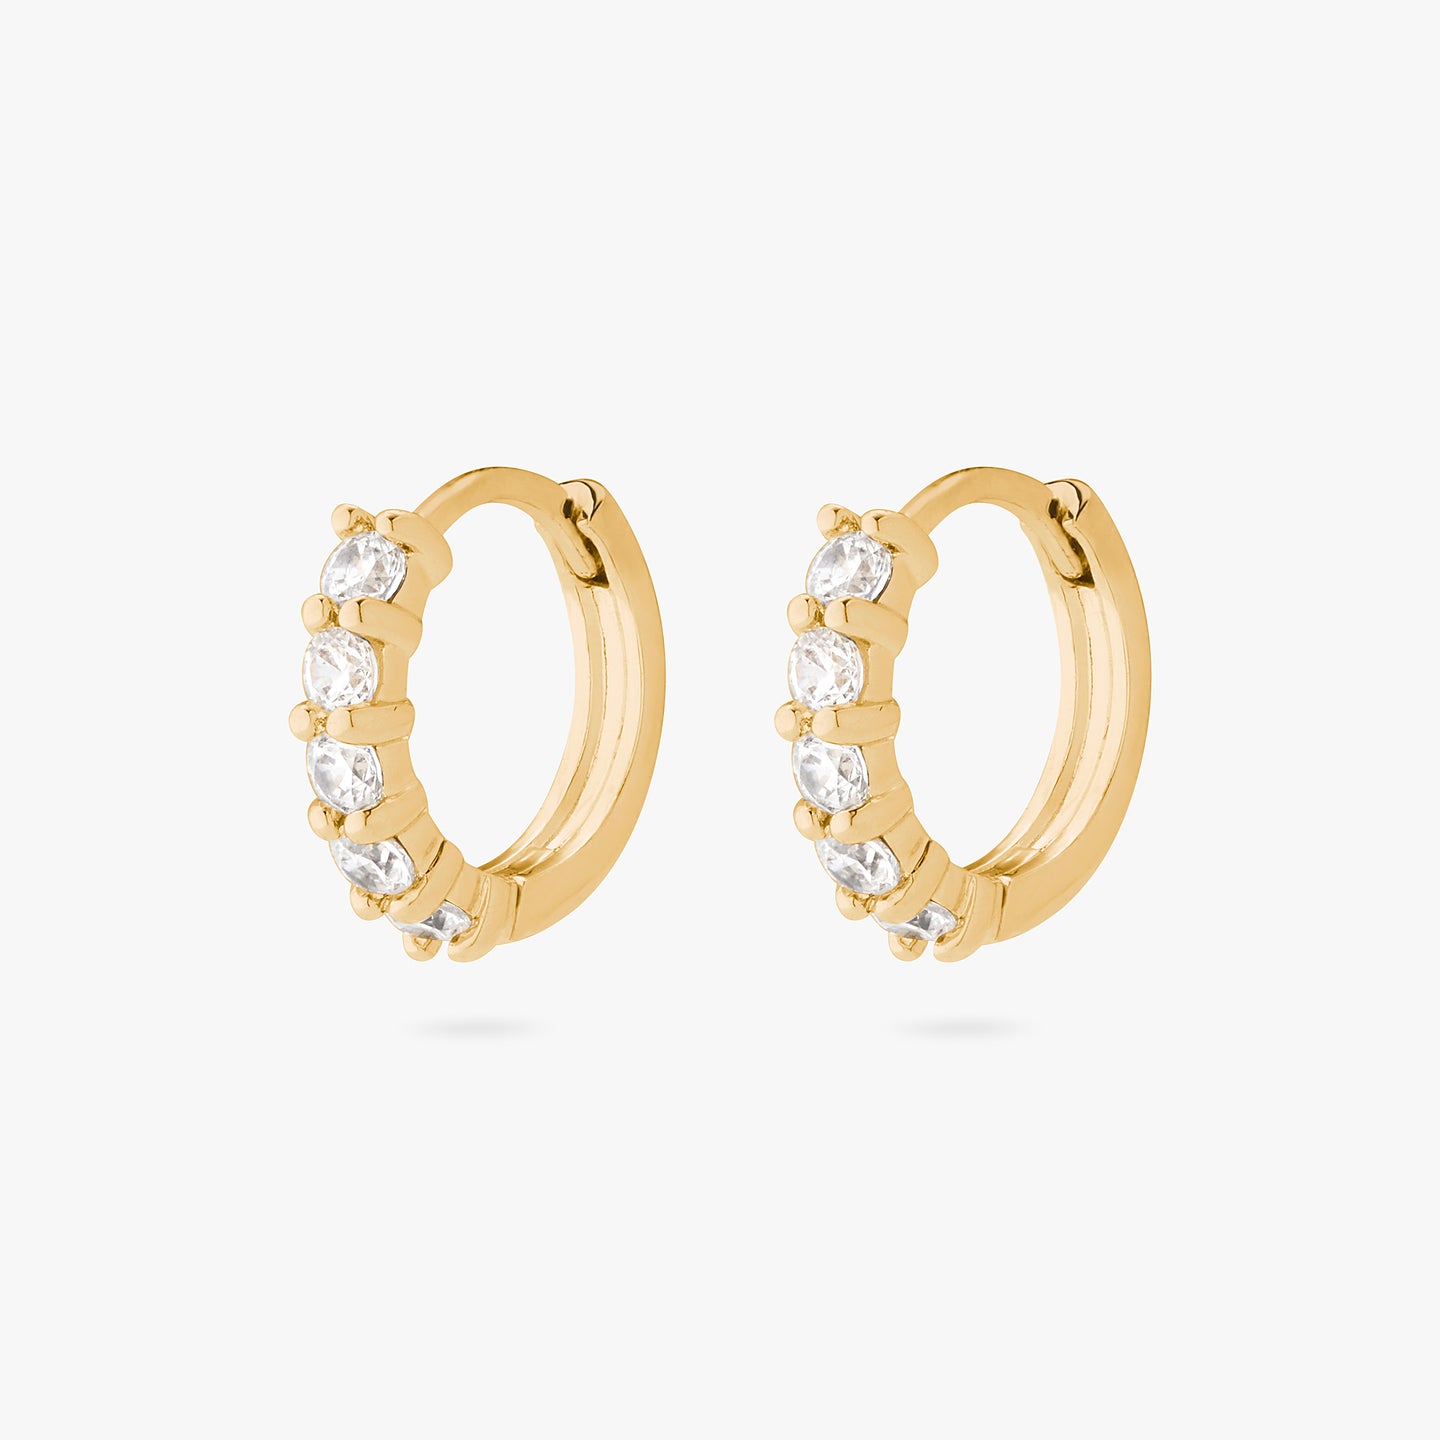 An image of a pair of gold/clear pave huggies with max pave stones. [pair] color:null|gold/clear